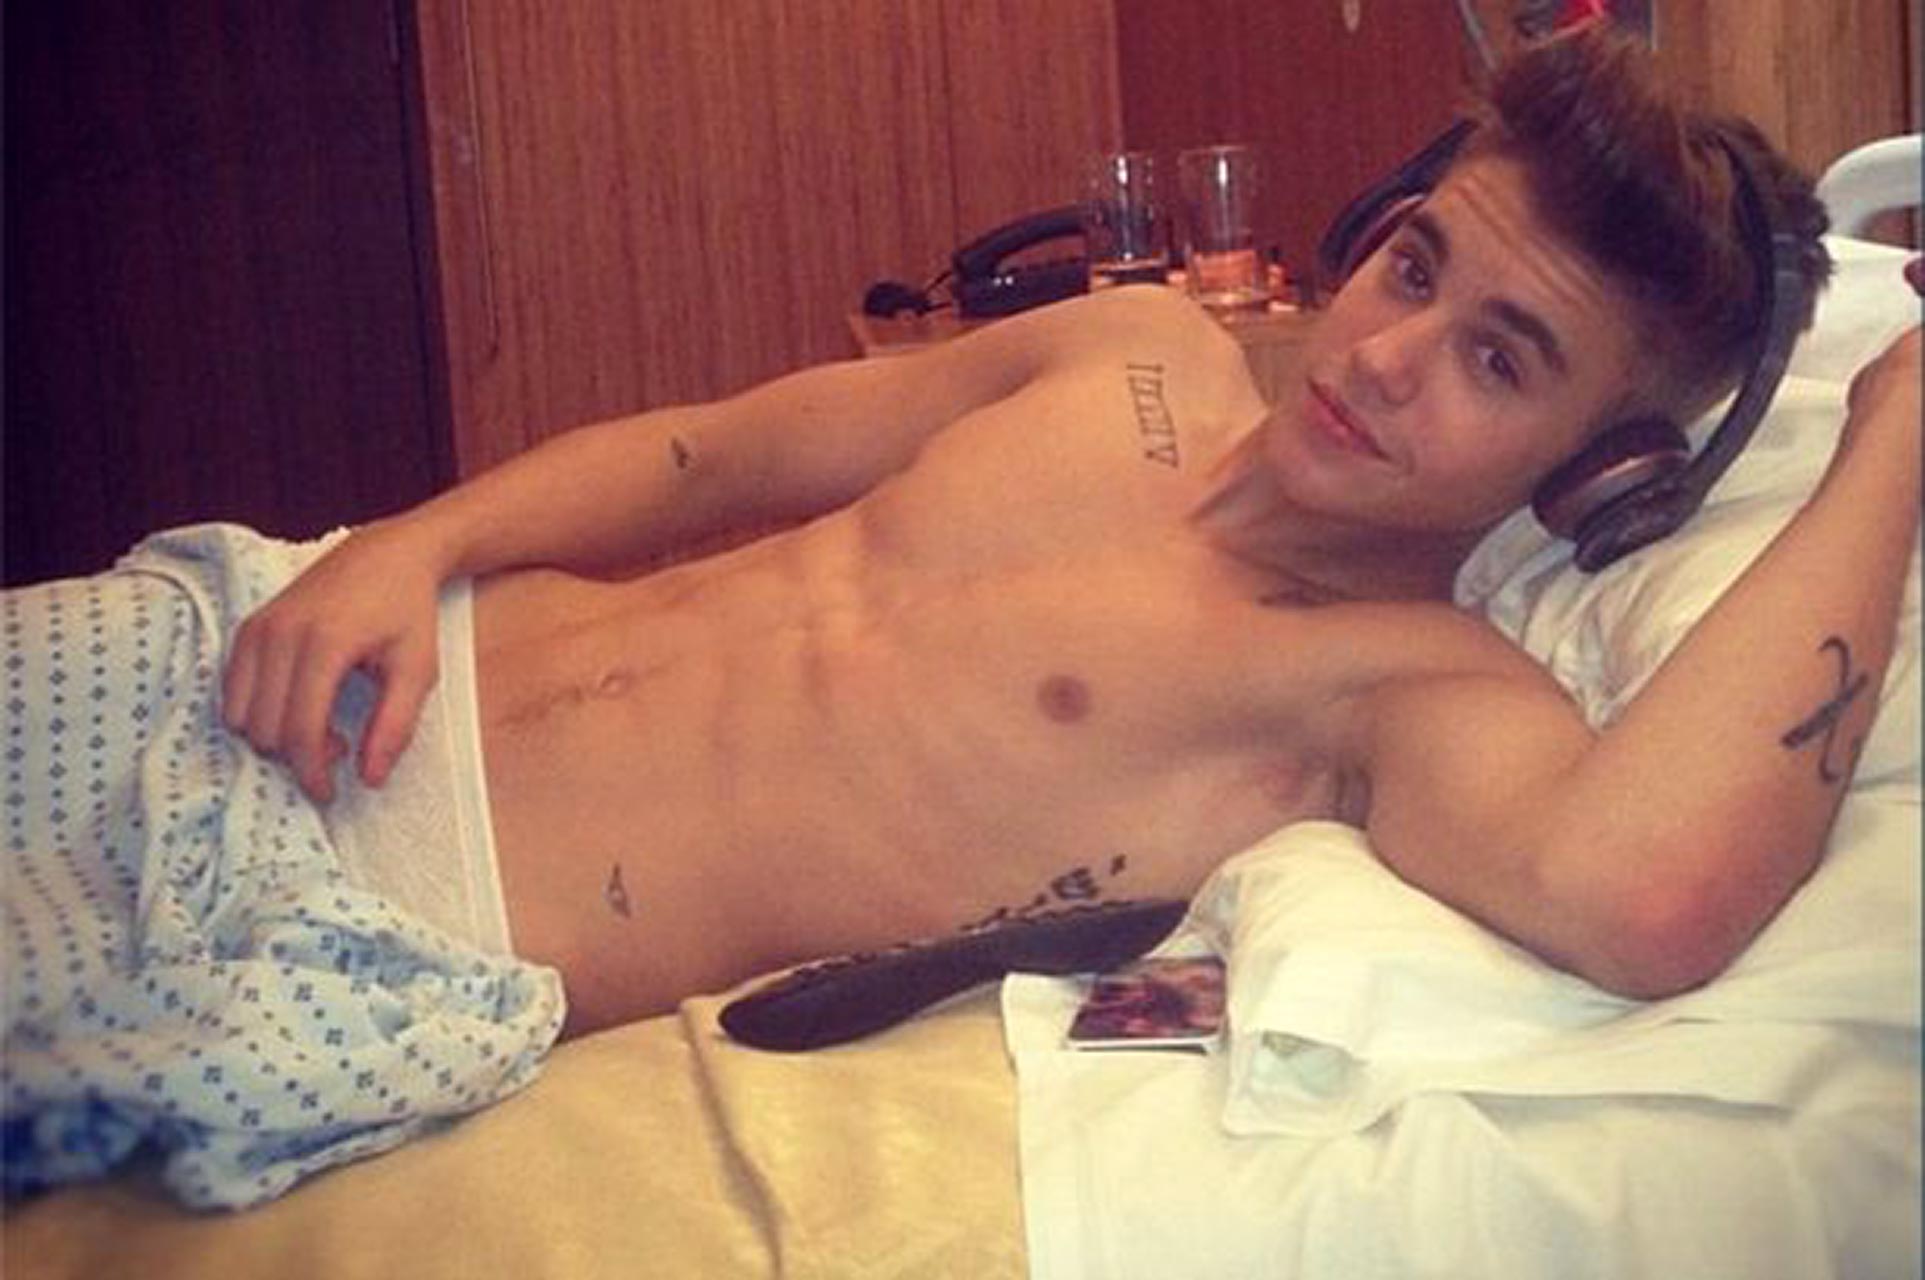 Bieber nude photos uncensored justin Good Lord,